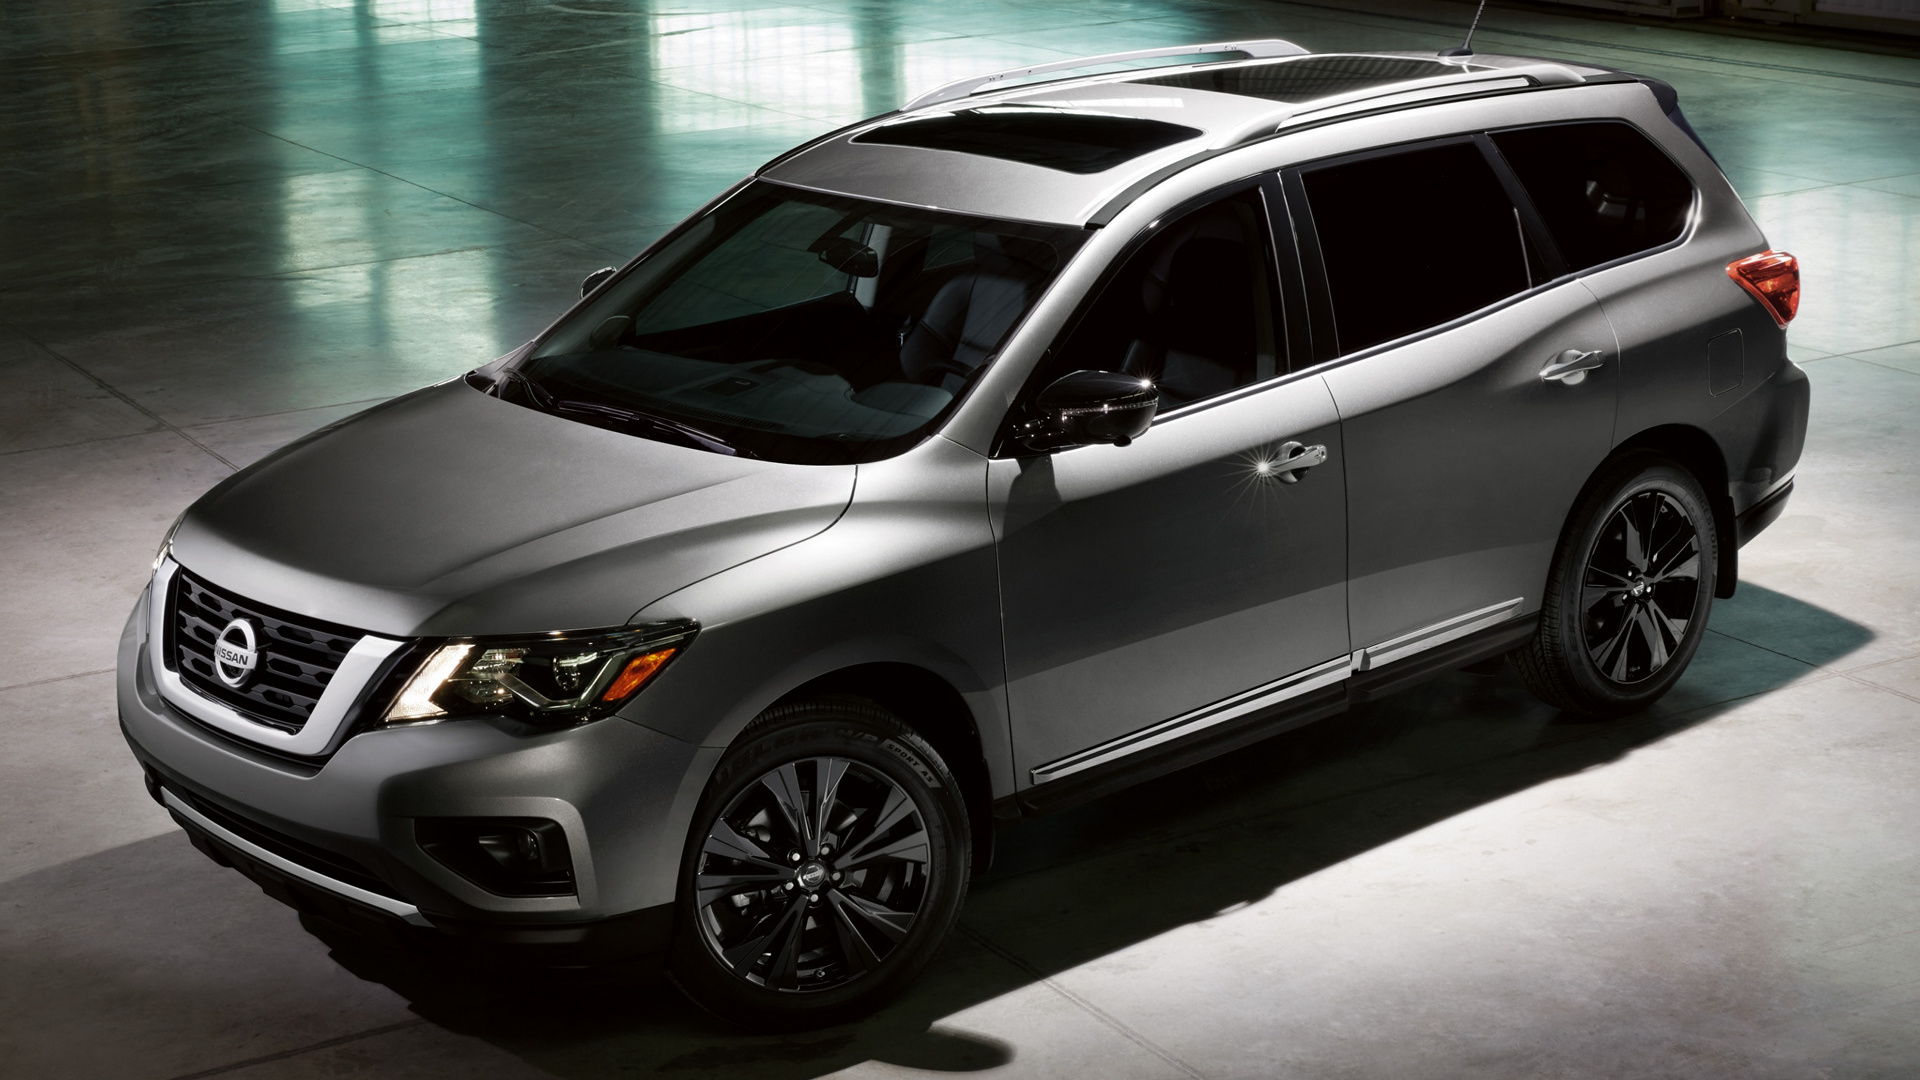 Nissan Pathfinder Midnight Edition Wallpaper And HD Image